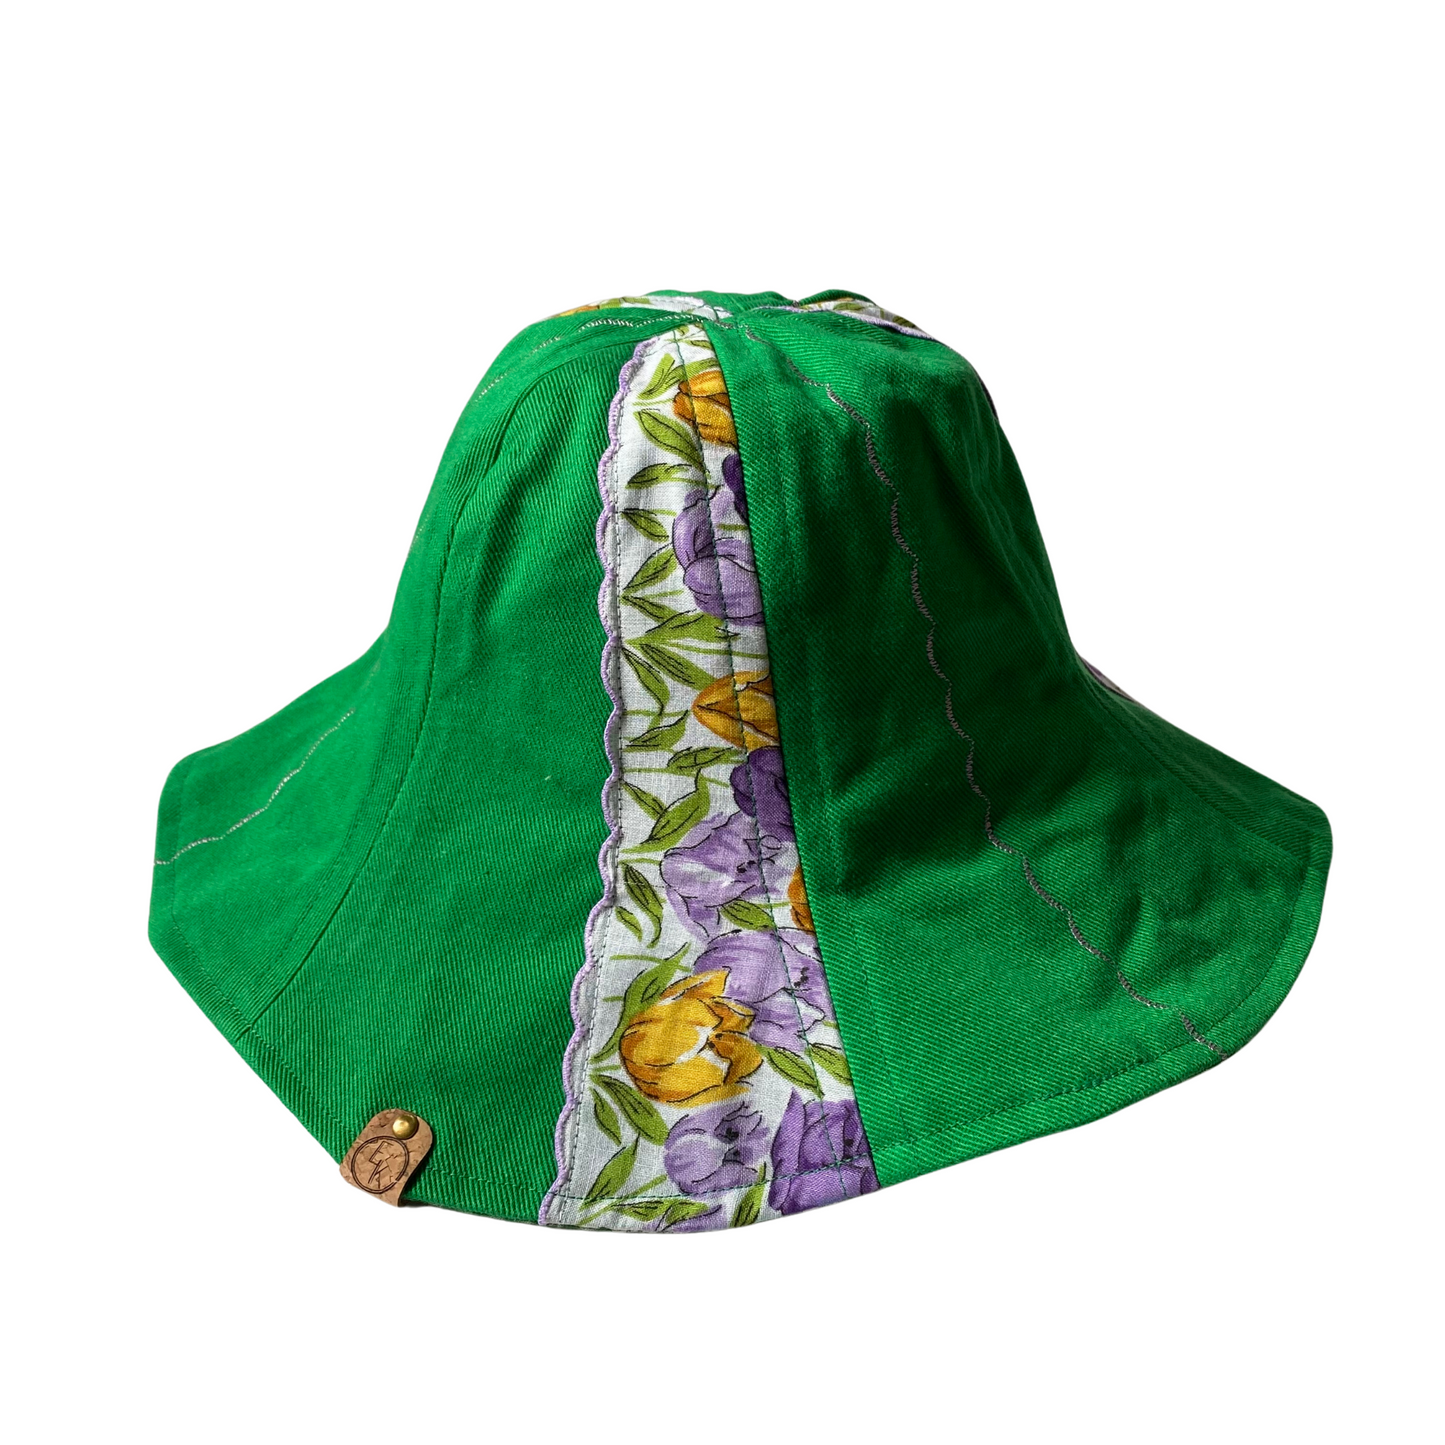 Tulips on a Tulip Hat